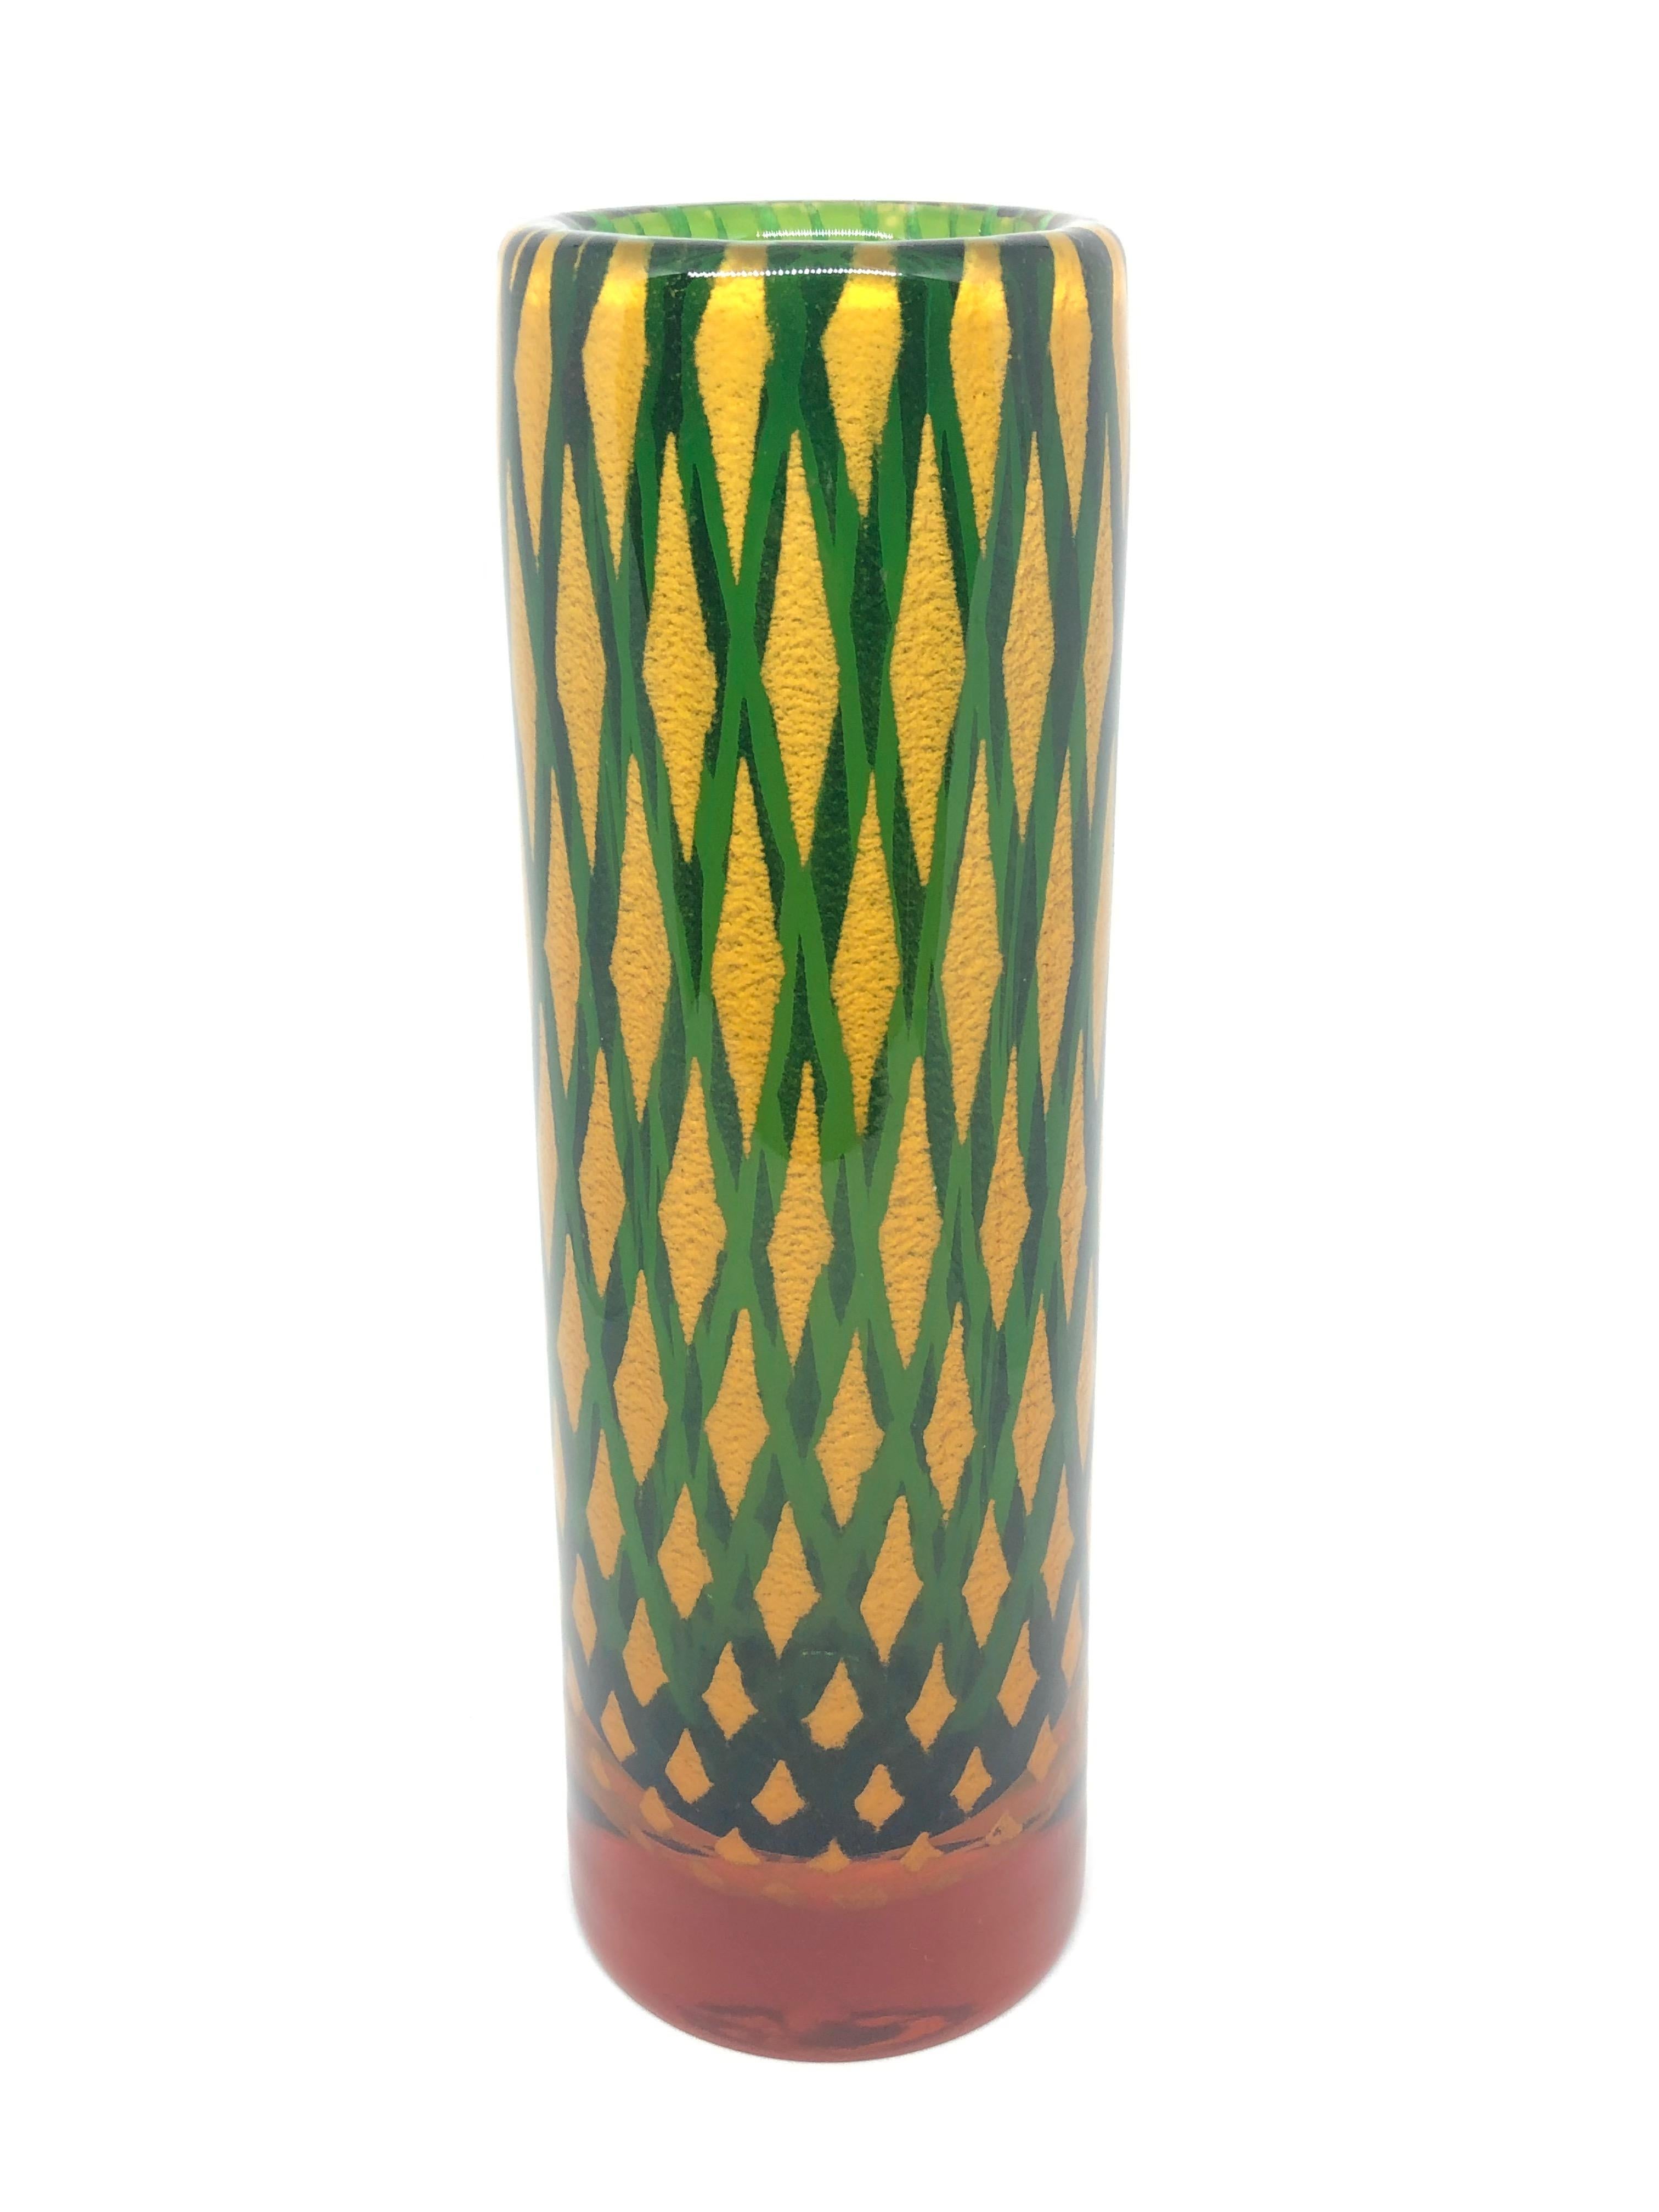 Beautiful Murano hand blown Italian art glass vase. Created attributed to Galliano Ferro. Brilliant green, amber and kind of yellow gold color. A beautiful piece of art for any room.